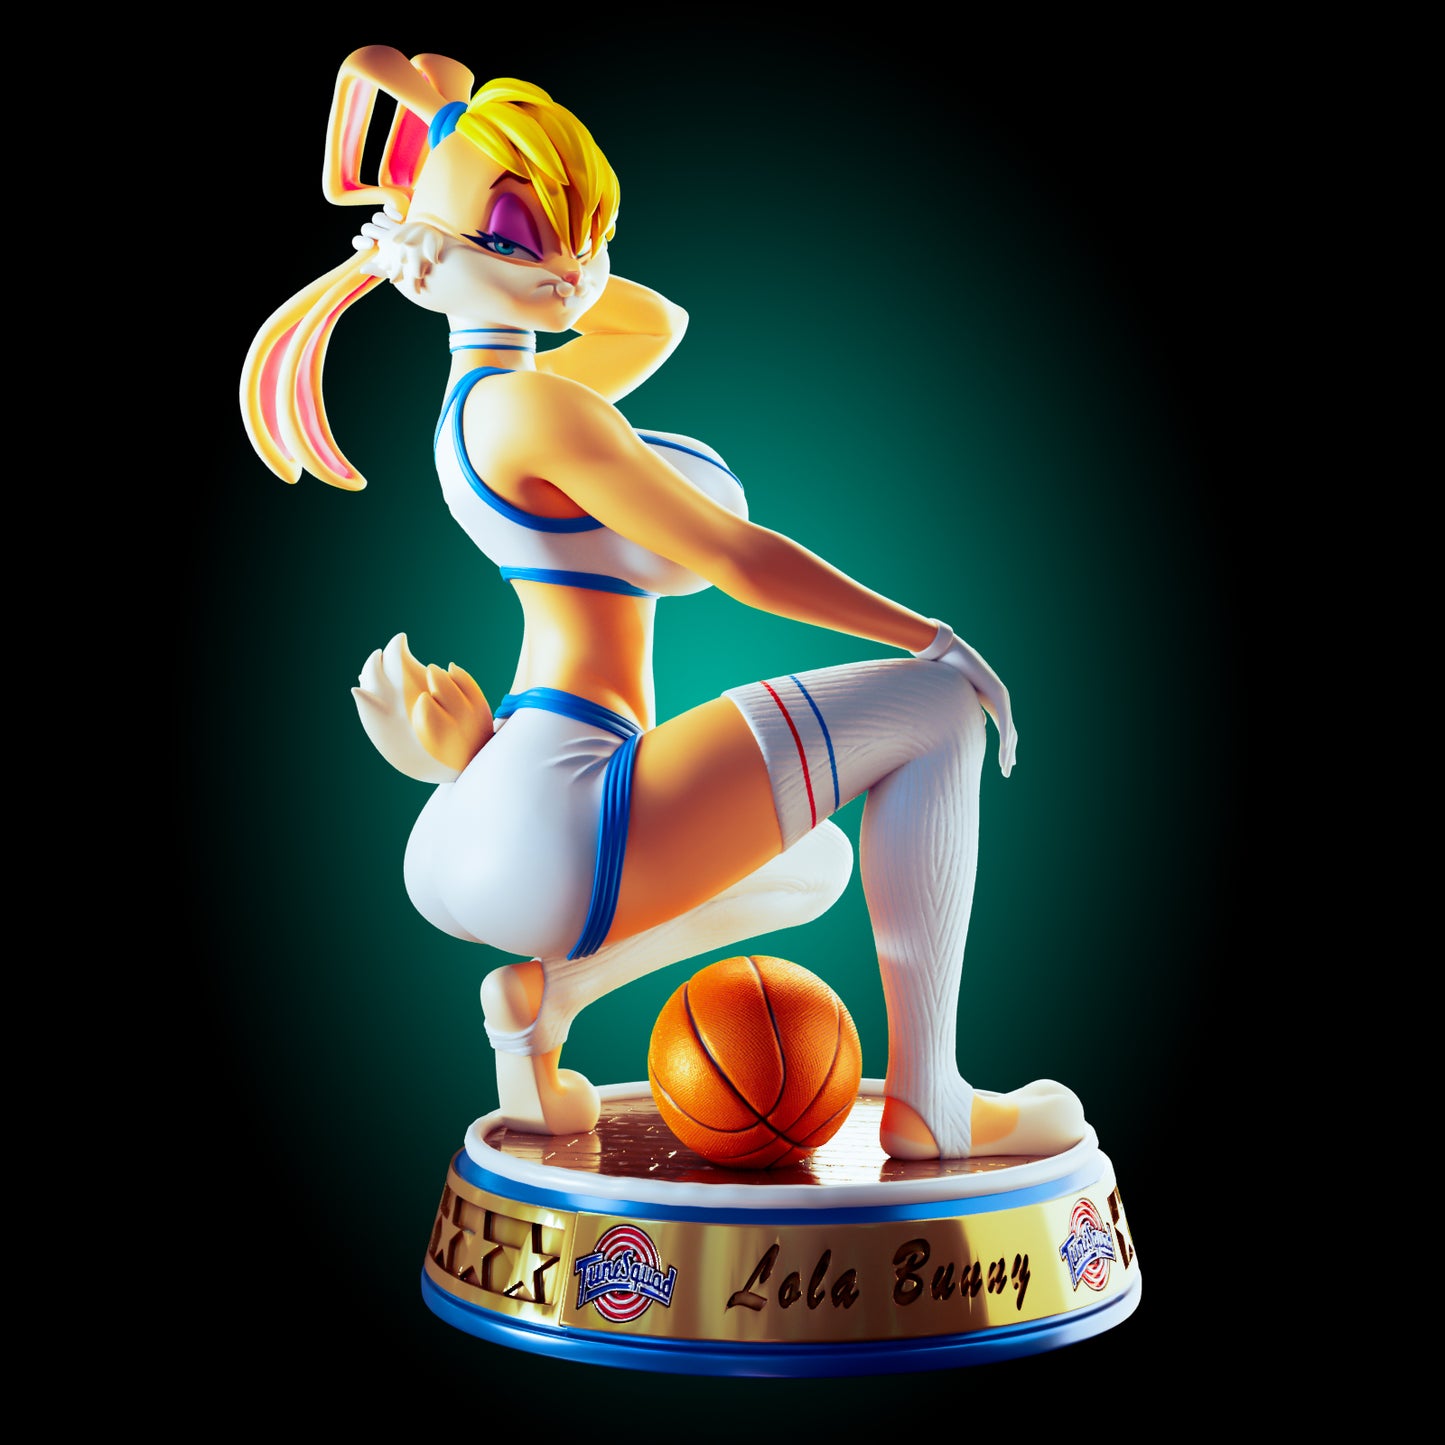 Lola The Bunny | Lola Bunny from the Toon Squad | Space Jam from Officer Rhu (FUTA editions are now available for all ADULT figures) Model Kit for painting and collecting.